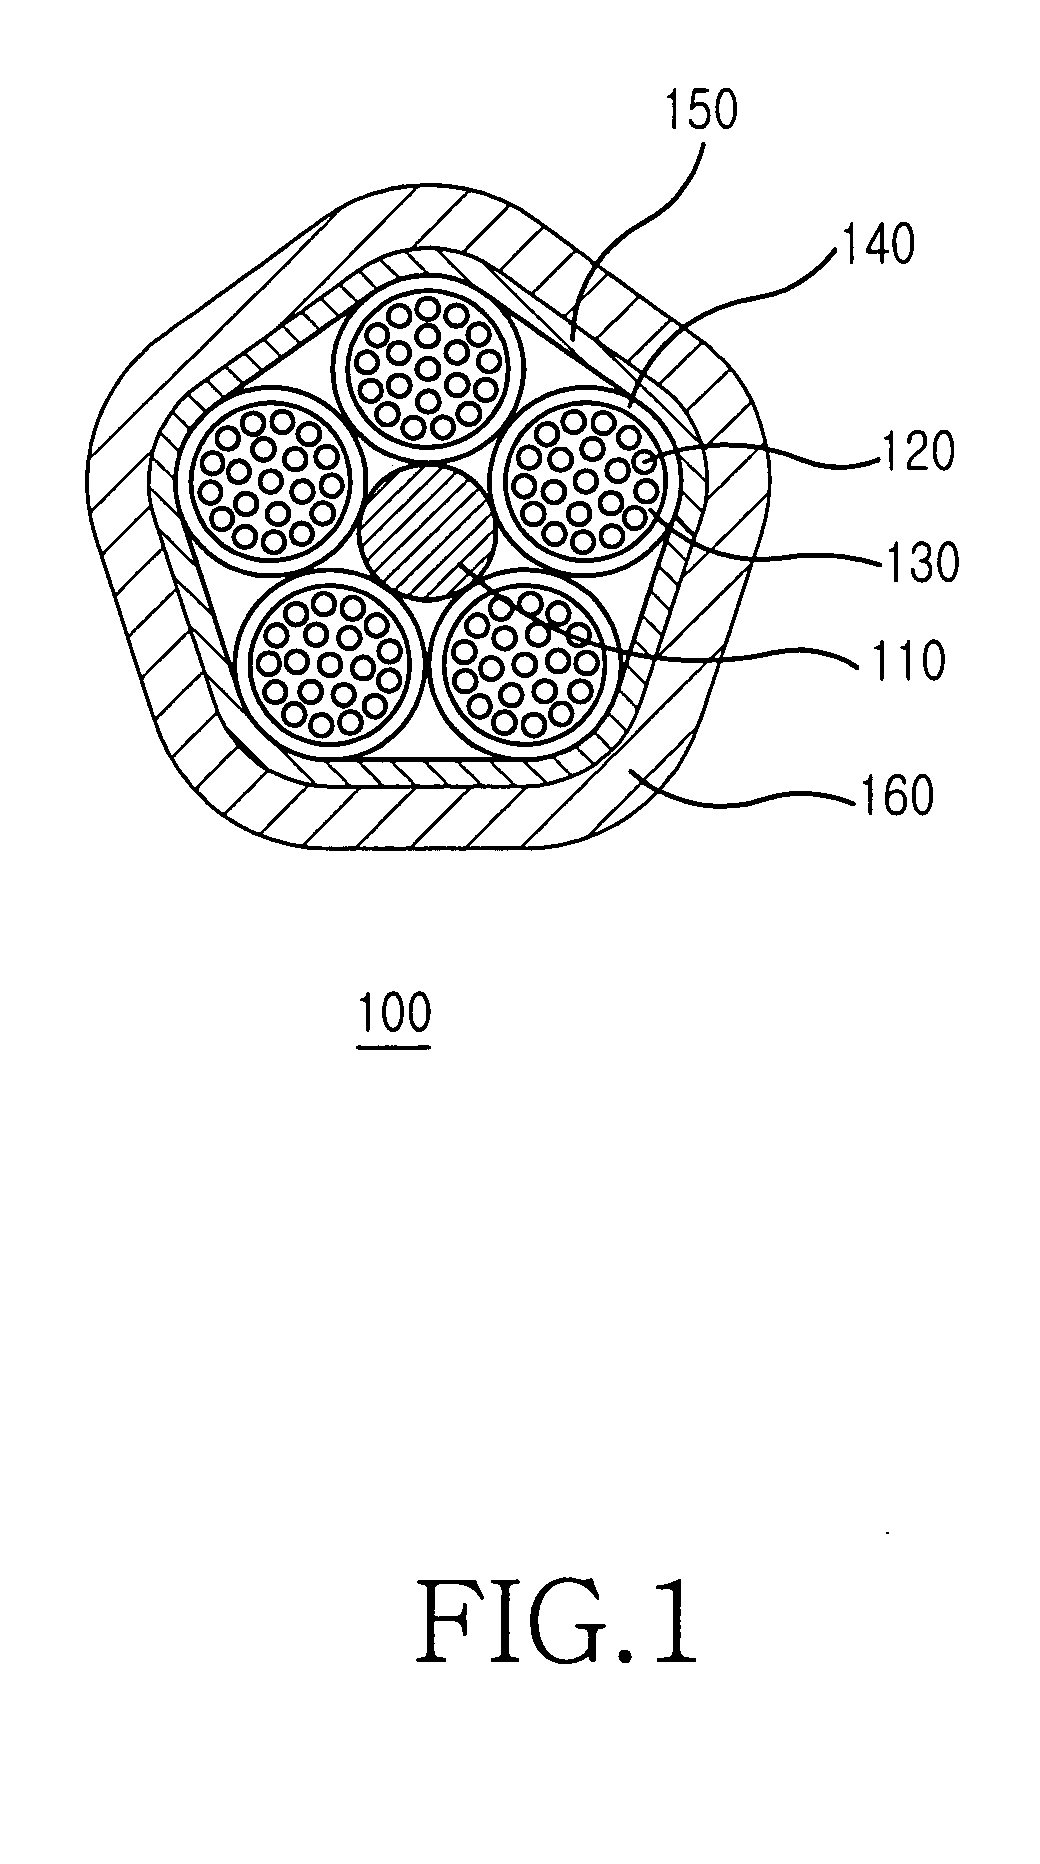 Optical filber cable suitable for installation using an air-blown installation method